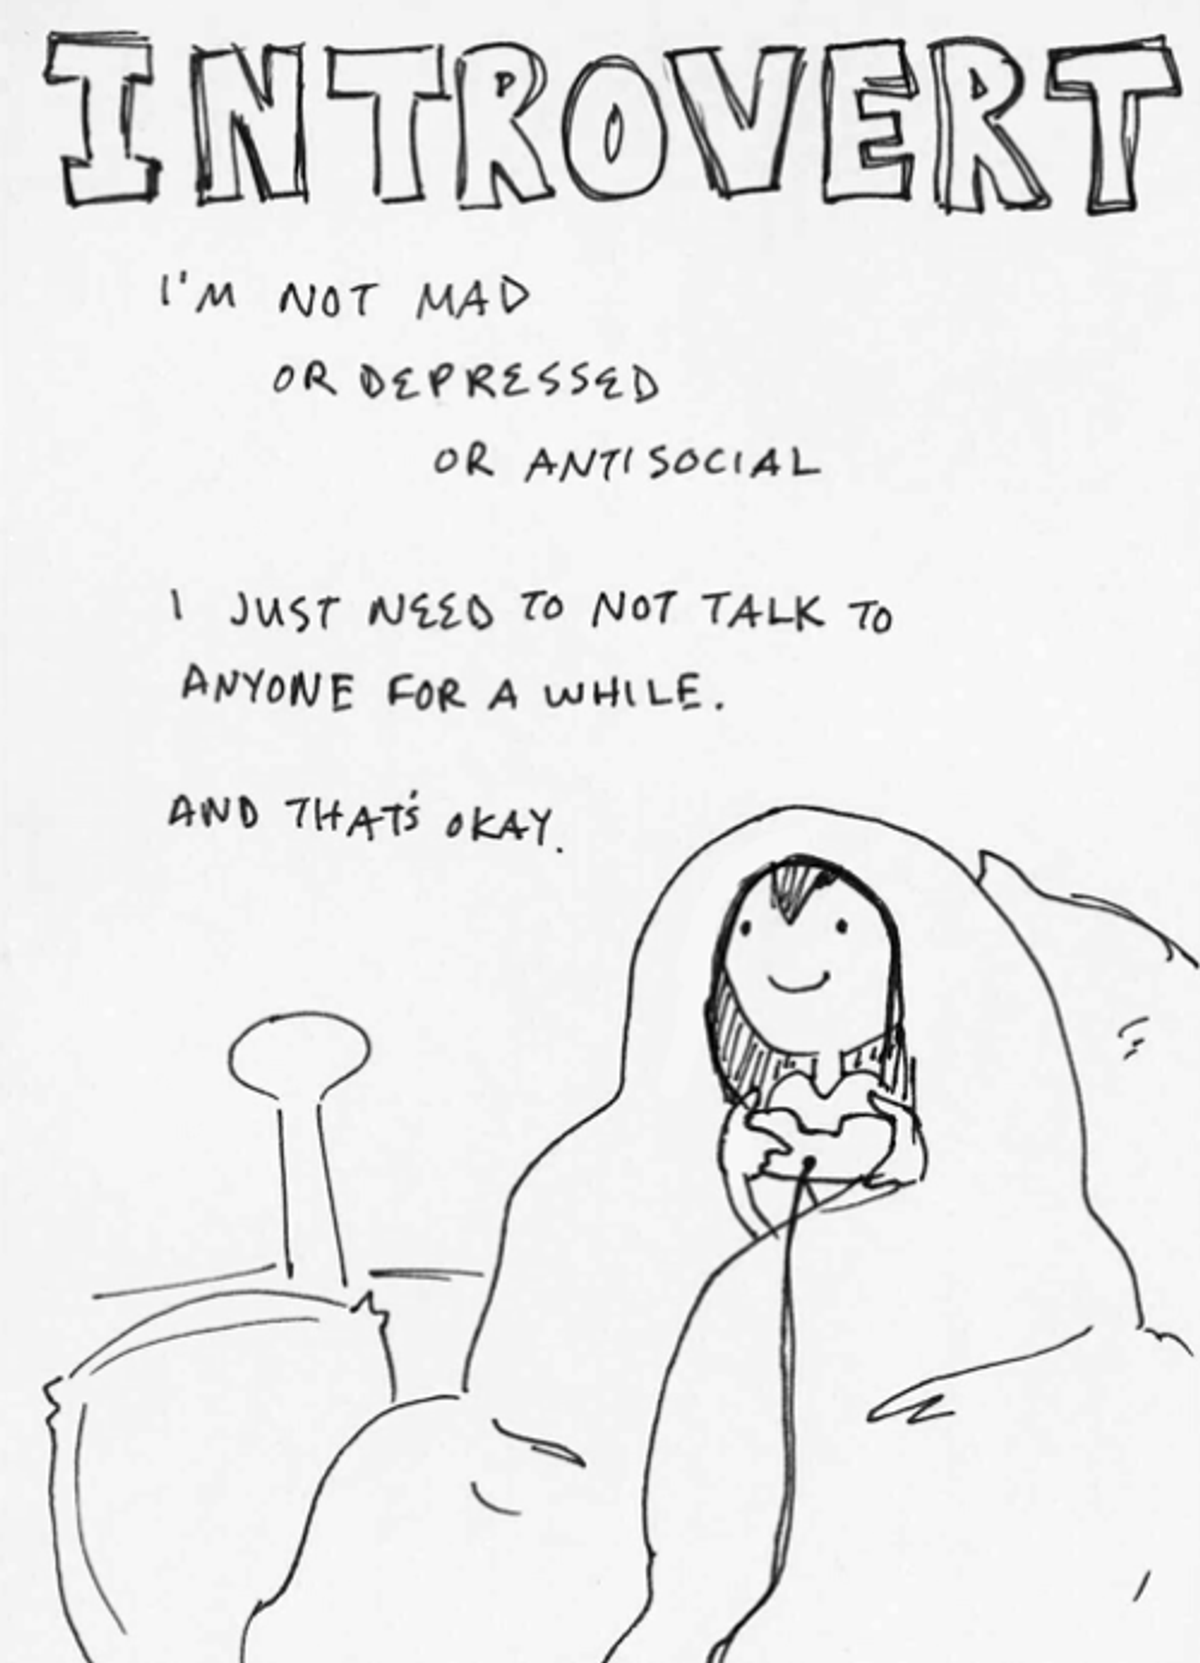 5 Common Misconceptions About Introverts